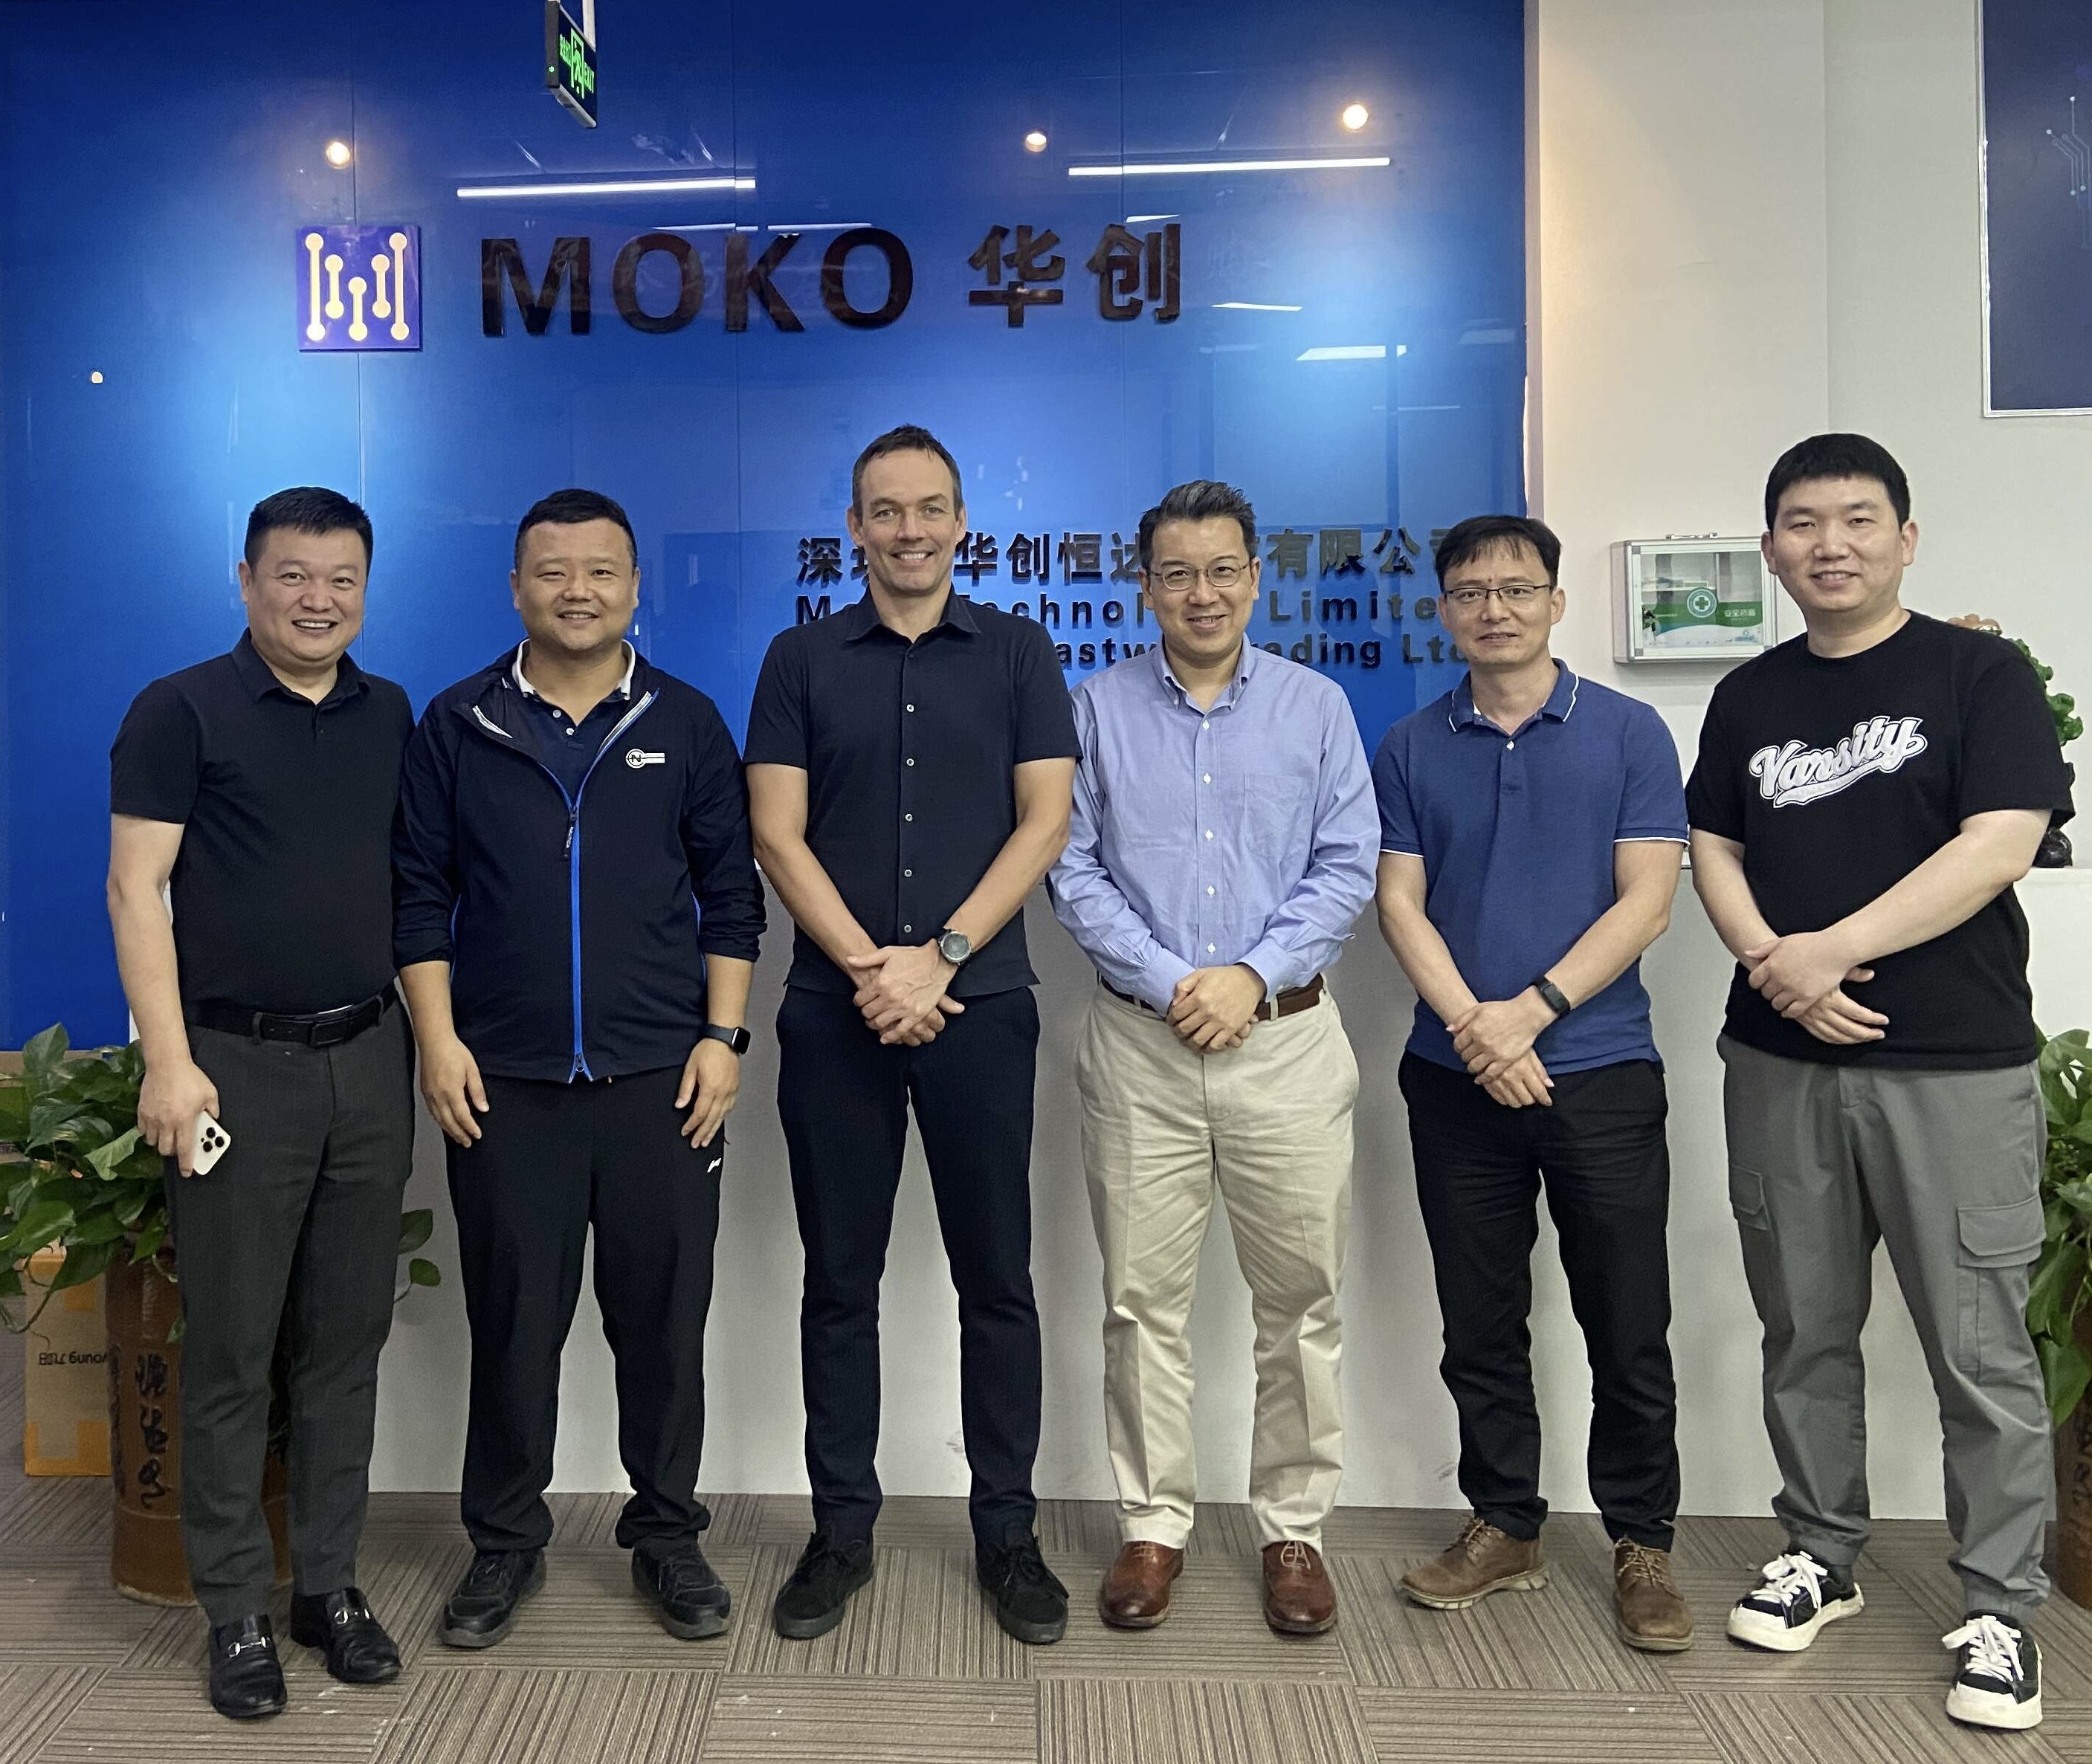 MOKOSMART's IoT plug realize the remote energy management with Nordic Bluetooth  LE - MOKOSmart #1 Smart Device Solution in China